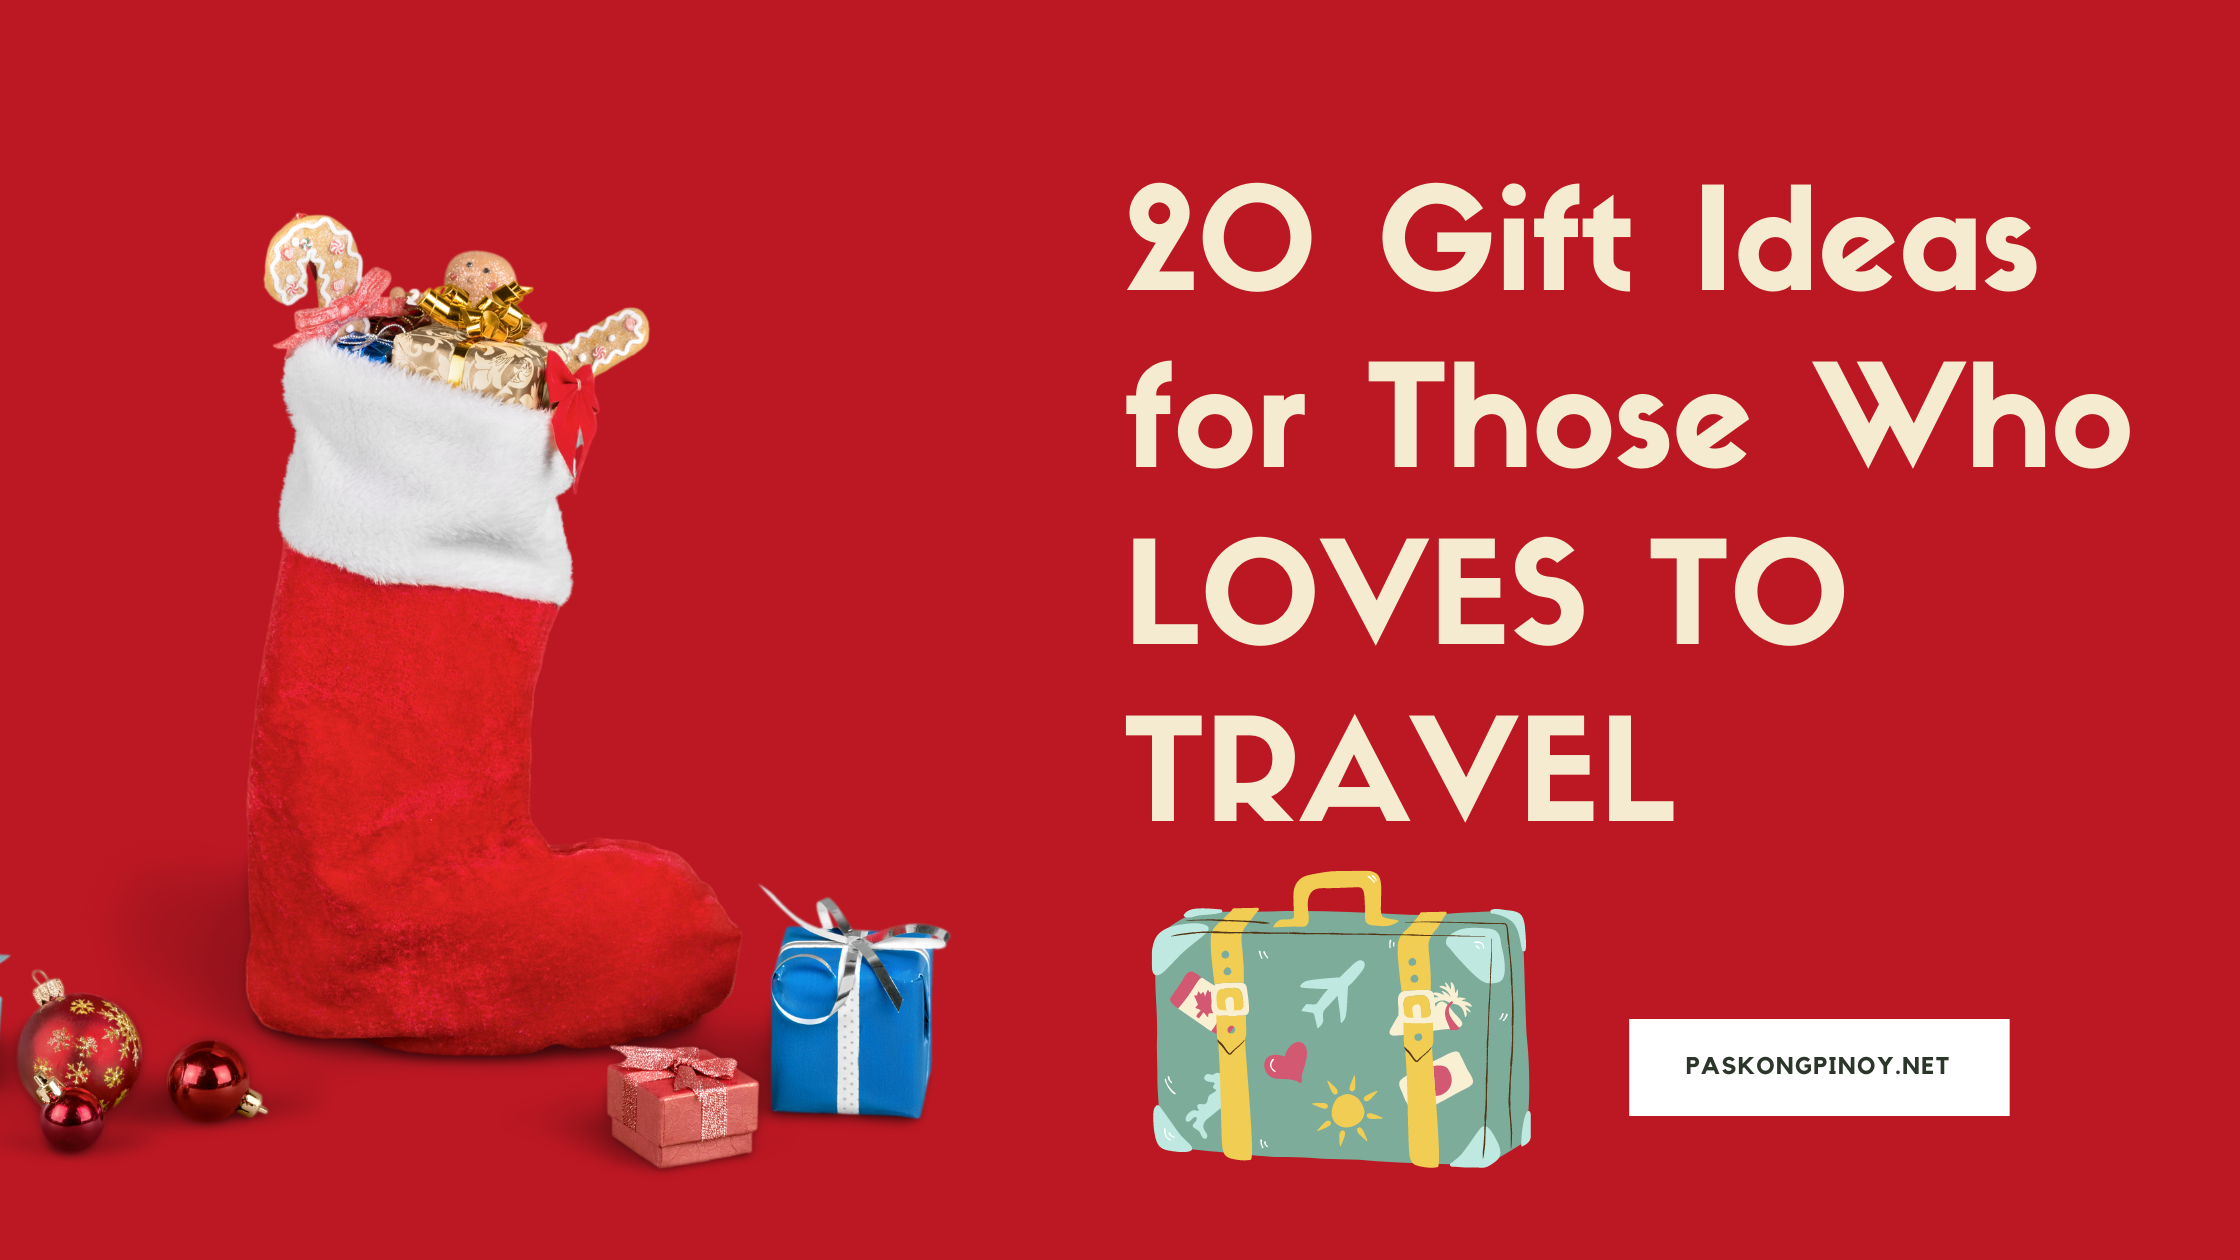 20 Gift Ideas for Those Who Loves To Travel